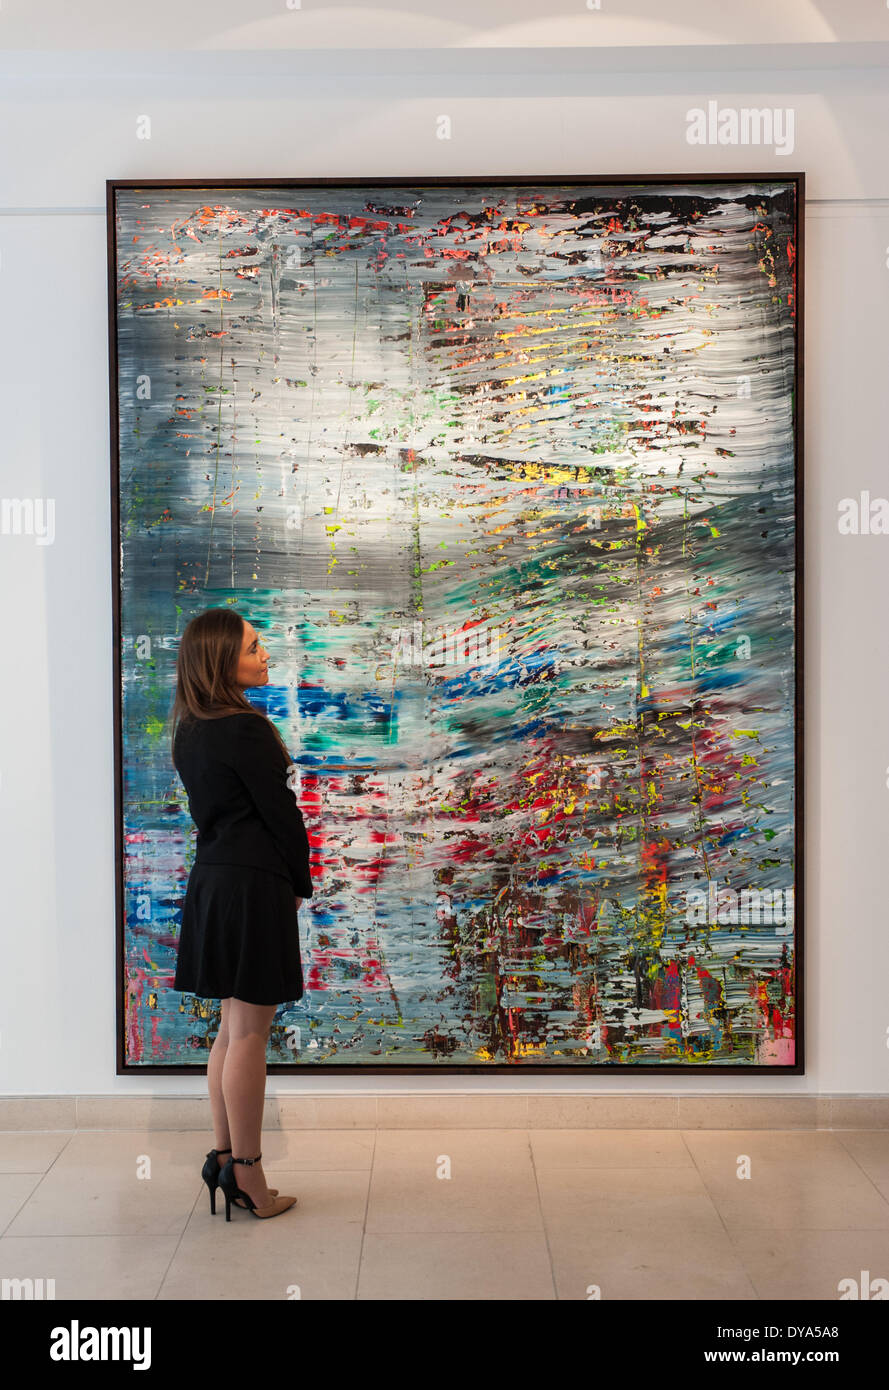 London, UK - 11 April 2014: a Christie’s employee looks at Abstraktes Bild (712), 1990 by Gerhard Richter during the preview of the Post-War and Contemporary Art evening sale that will take place in New York on the 13th May. Credit:  Piero Cruciatti/Alamy Live News Stock Photo